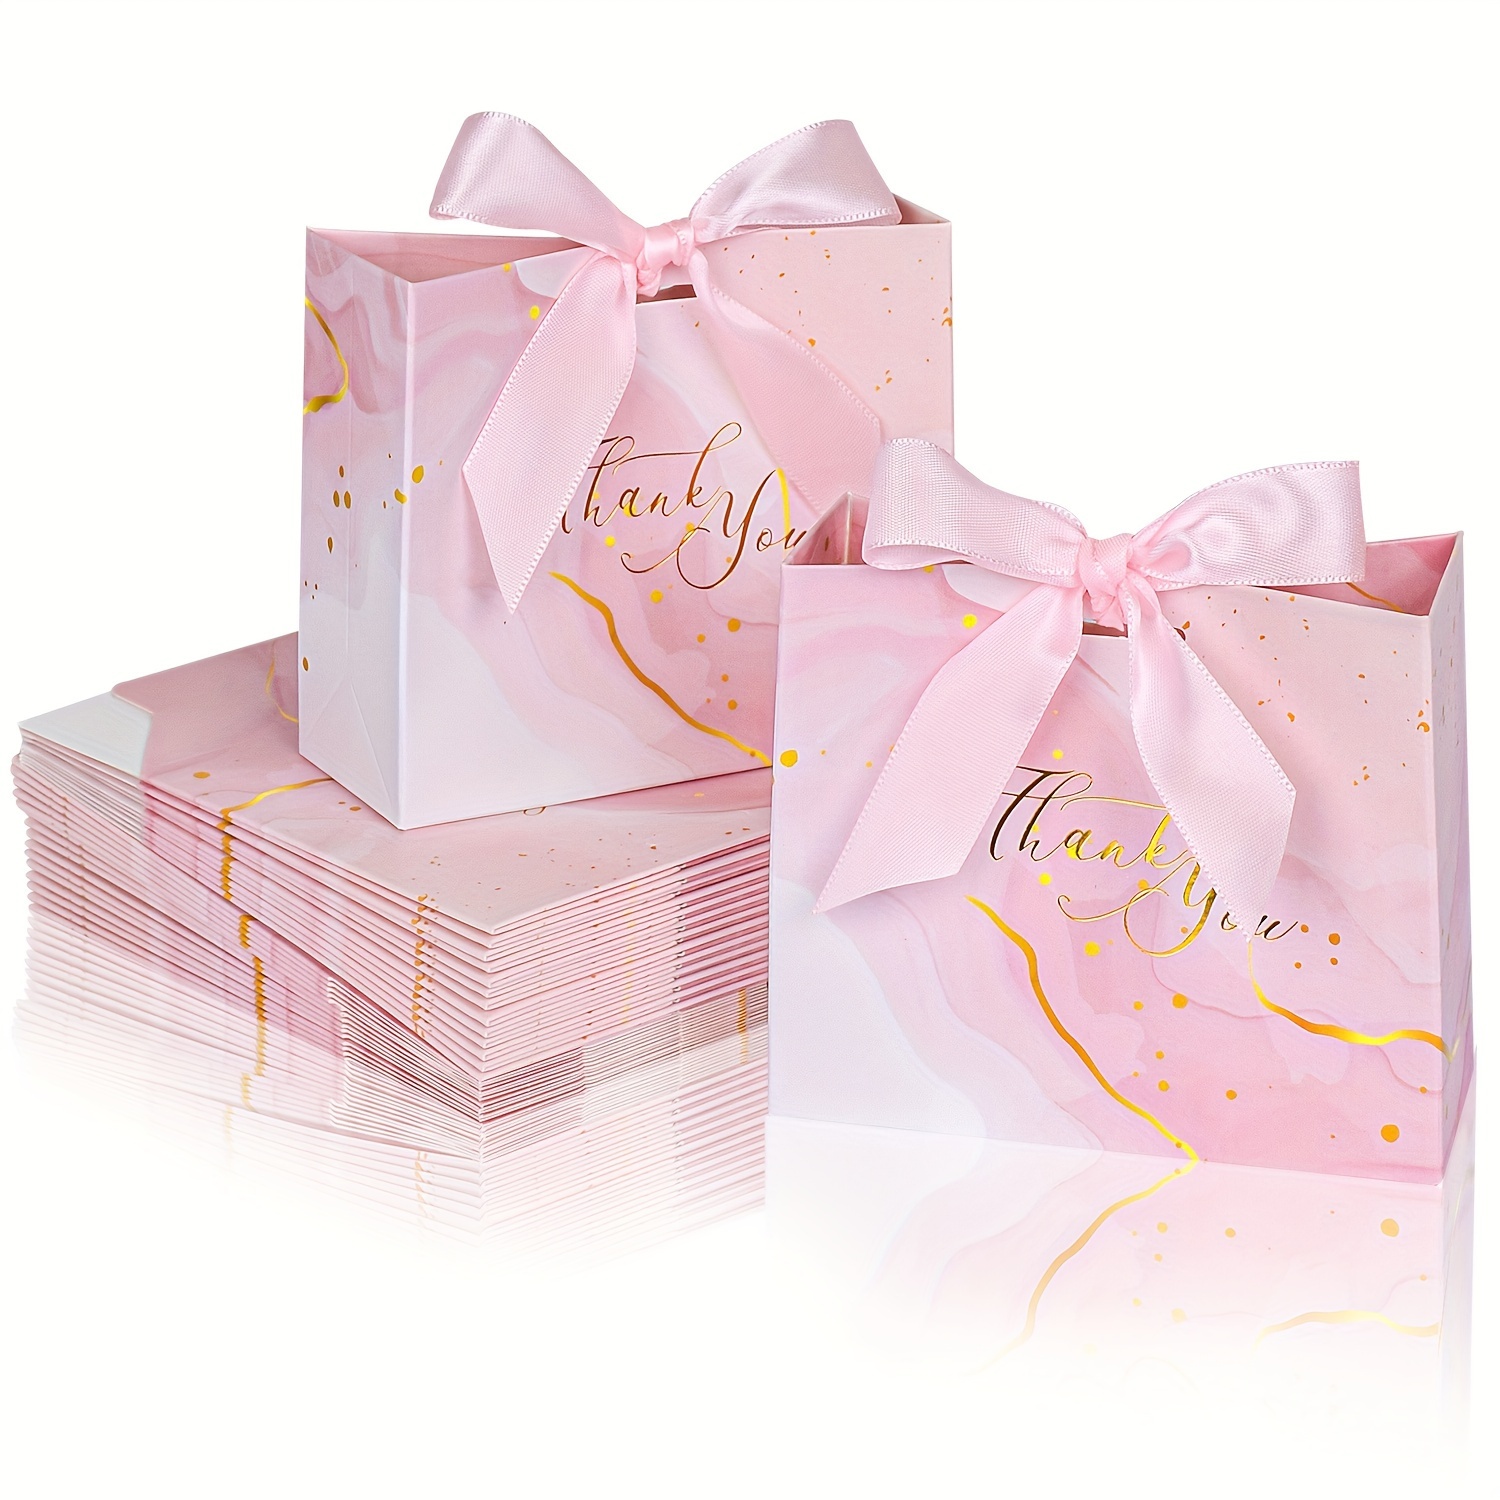 

50pcs, Pink Small Thank You Gift Bags, Marble Pattern Party Favor Pink Bags With Pink Bow Ribbon, Paper Bags For Birthday Wedding Bridesmaid Holiday Valentines Day